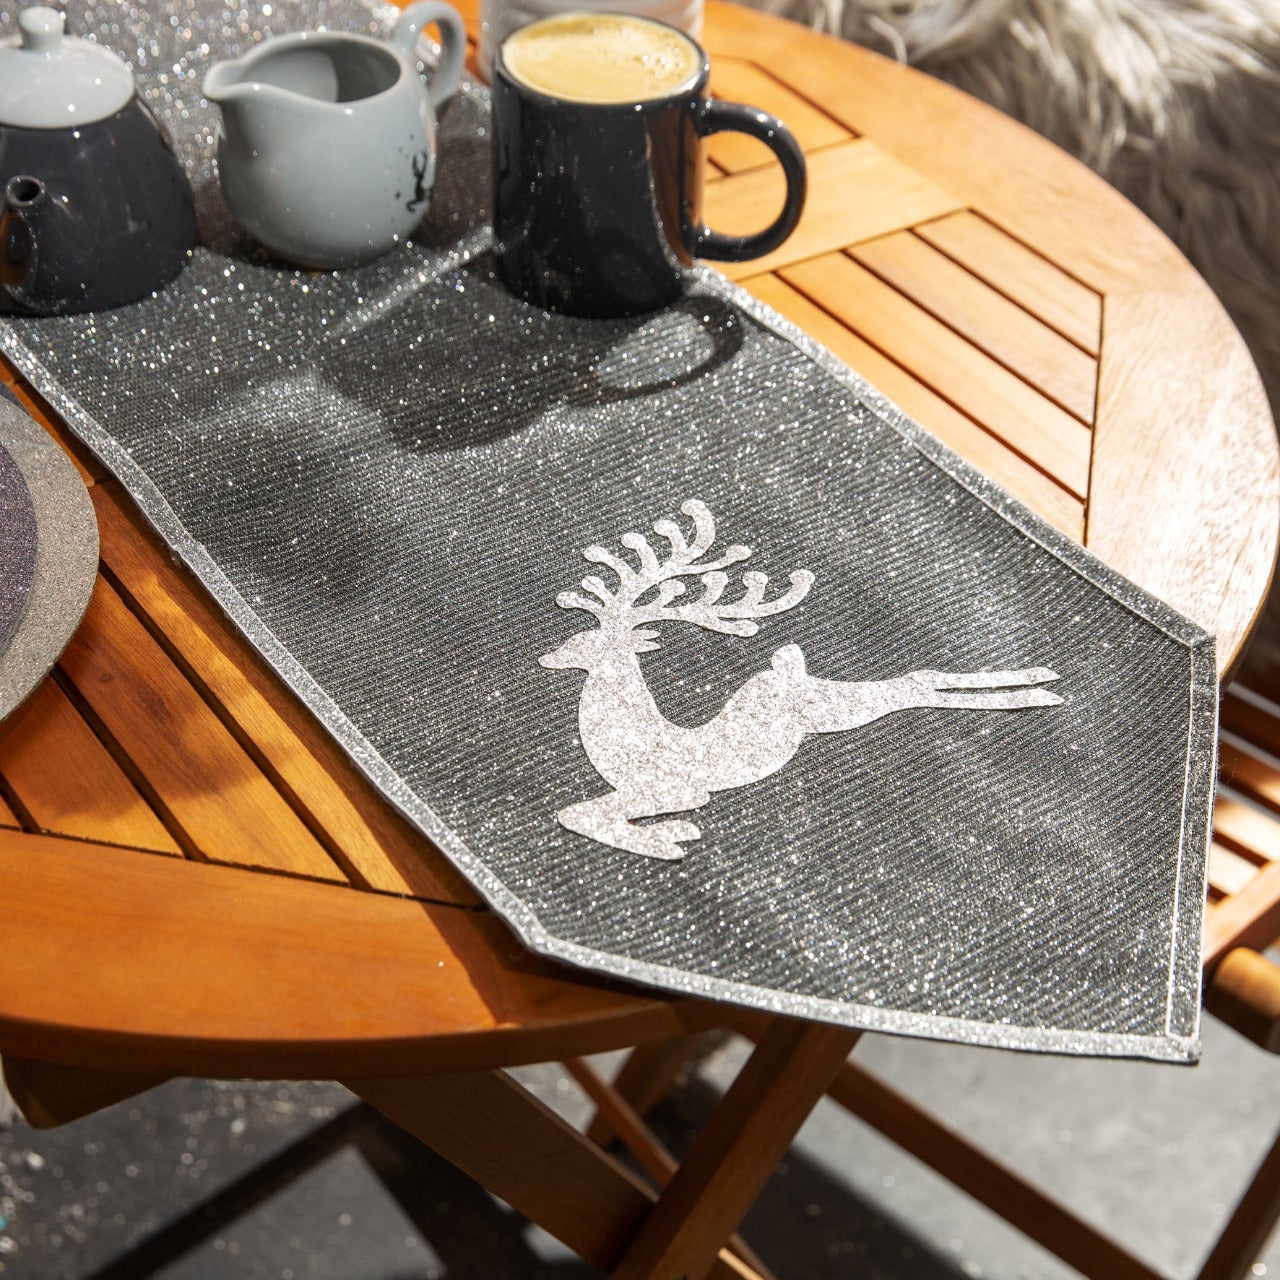 Christmas Silver Table Runner Reindeer Detail  Bring some shimmering festive luxury to the dinner table with this silver table runner. From the Moonlight Magic collection by Santa's Workshop - create all the spine-tingling twinkle of a winter’s night at home.